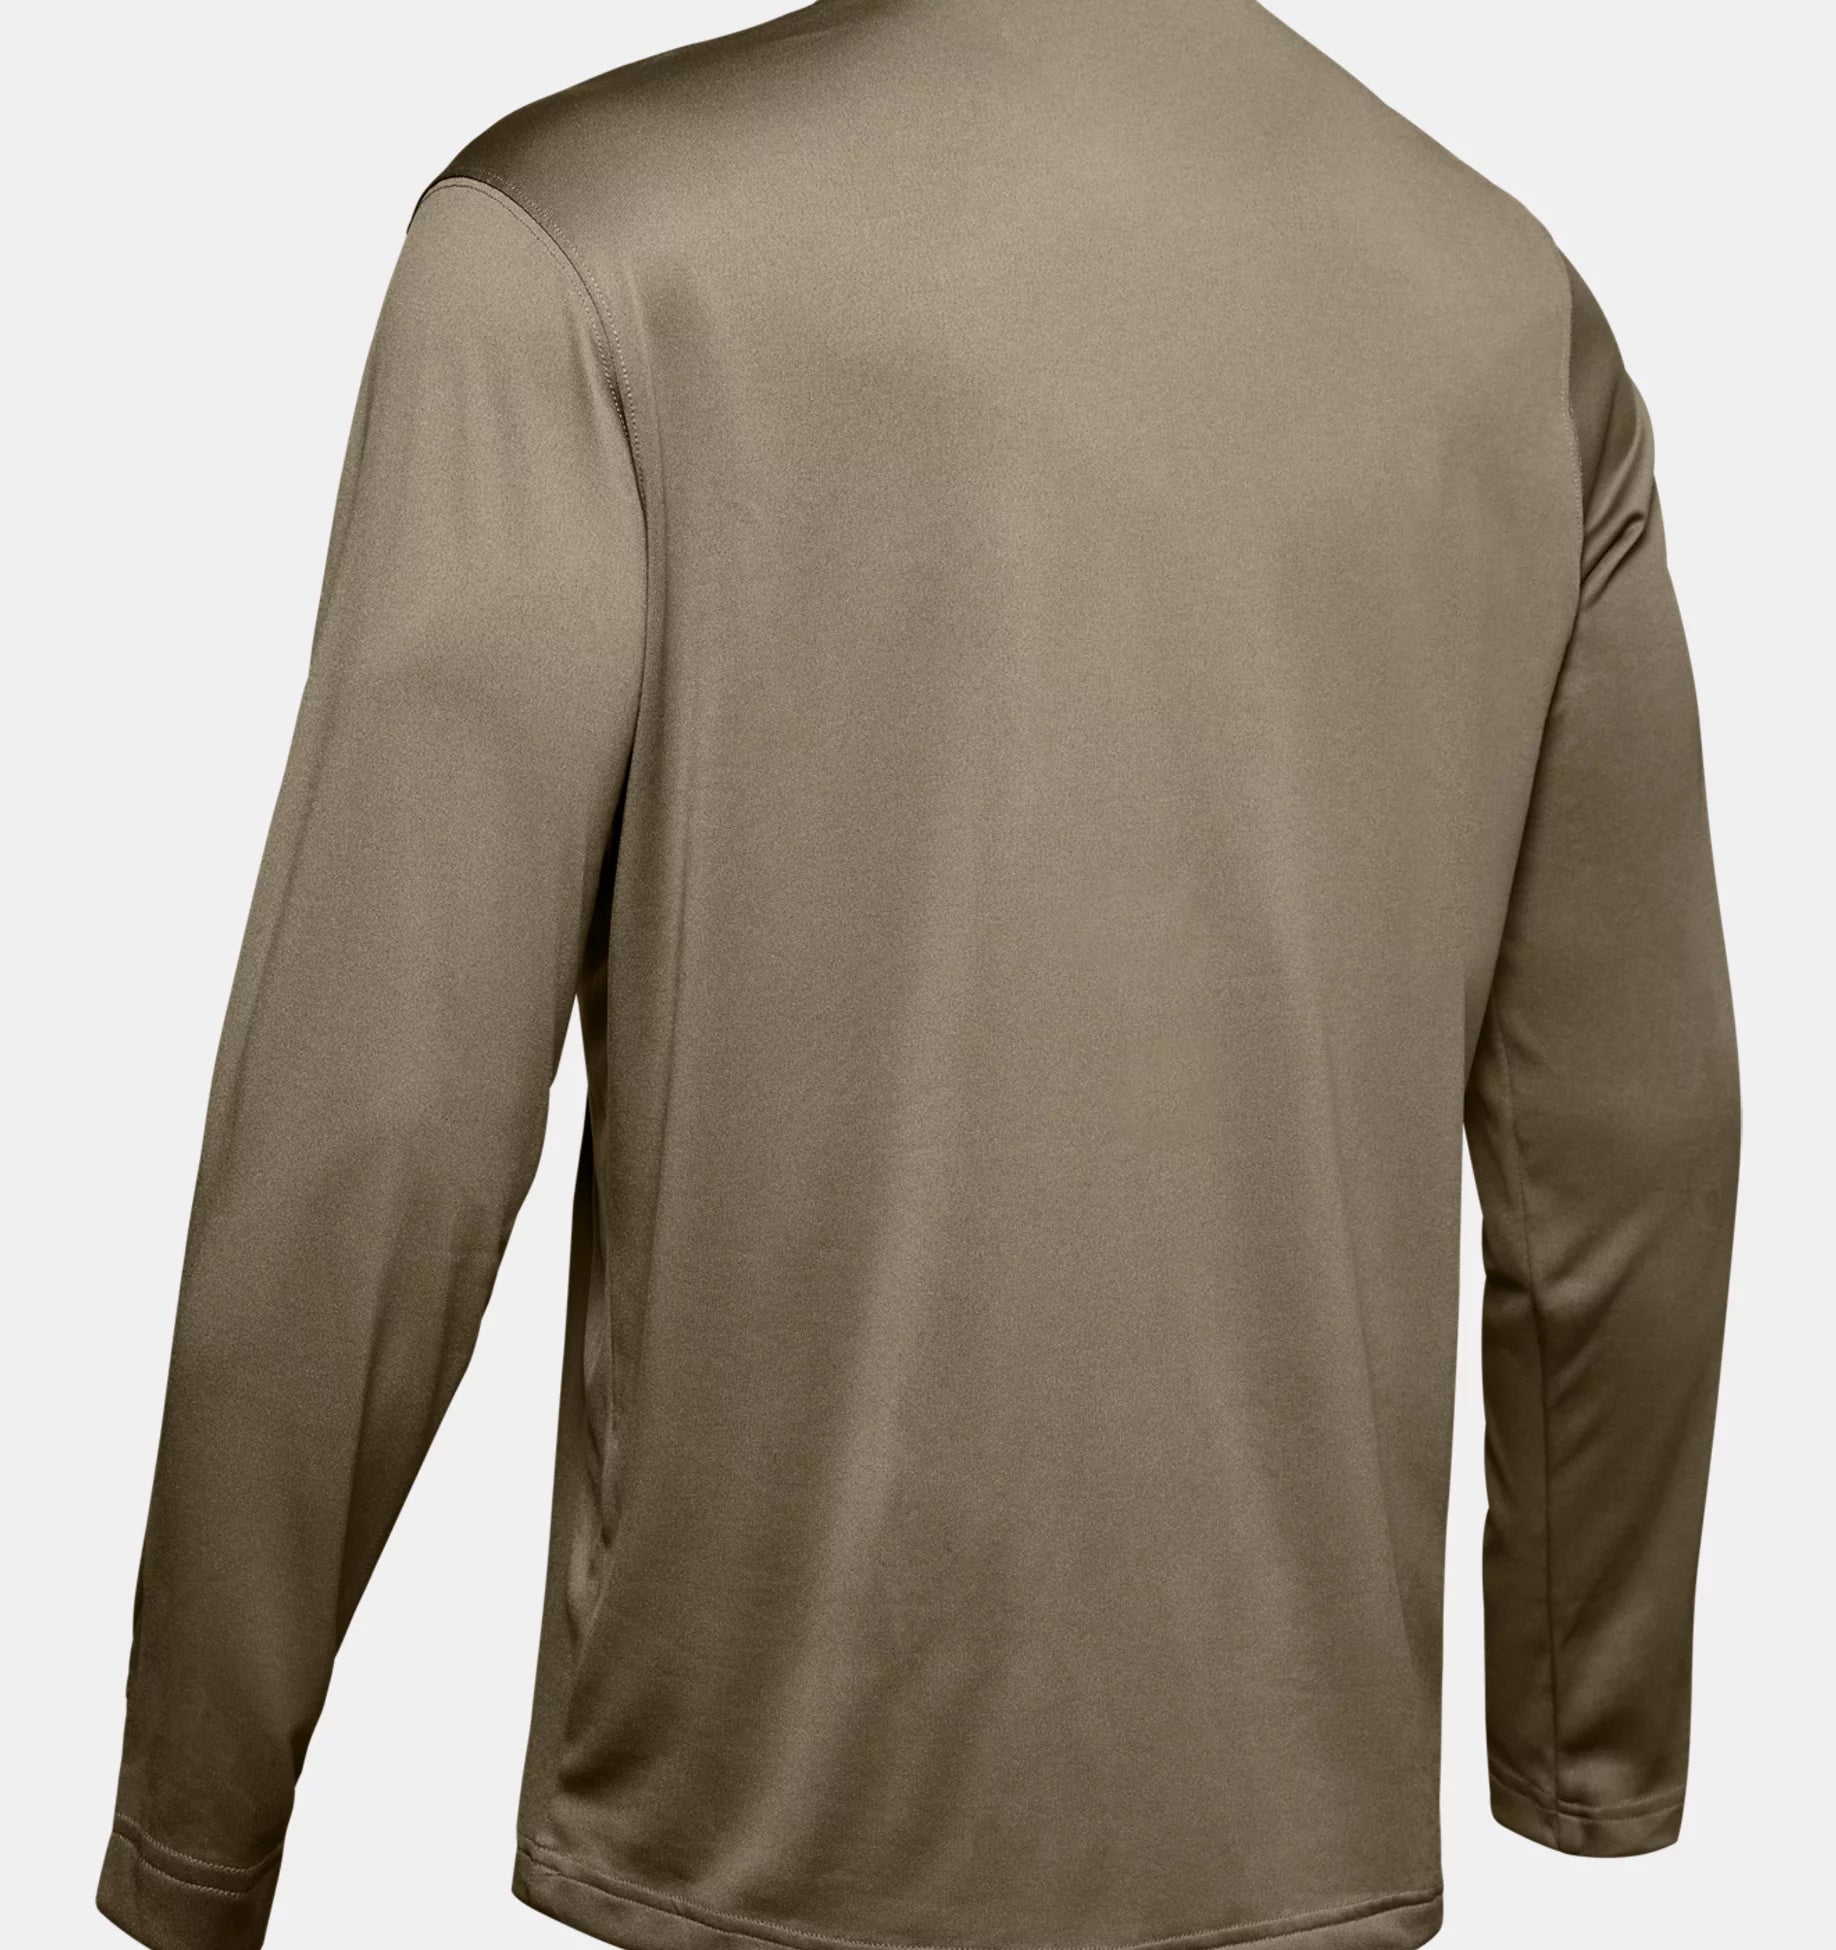 Under Armour Tactical UA Tech Long Sleeve T-Shirt 1248196 - Clothing & Accessories